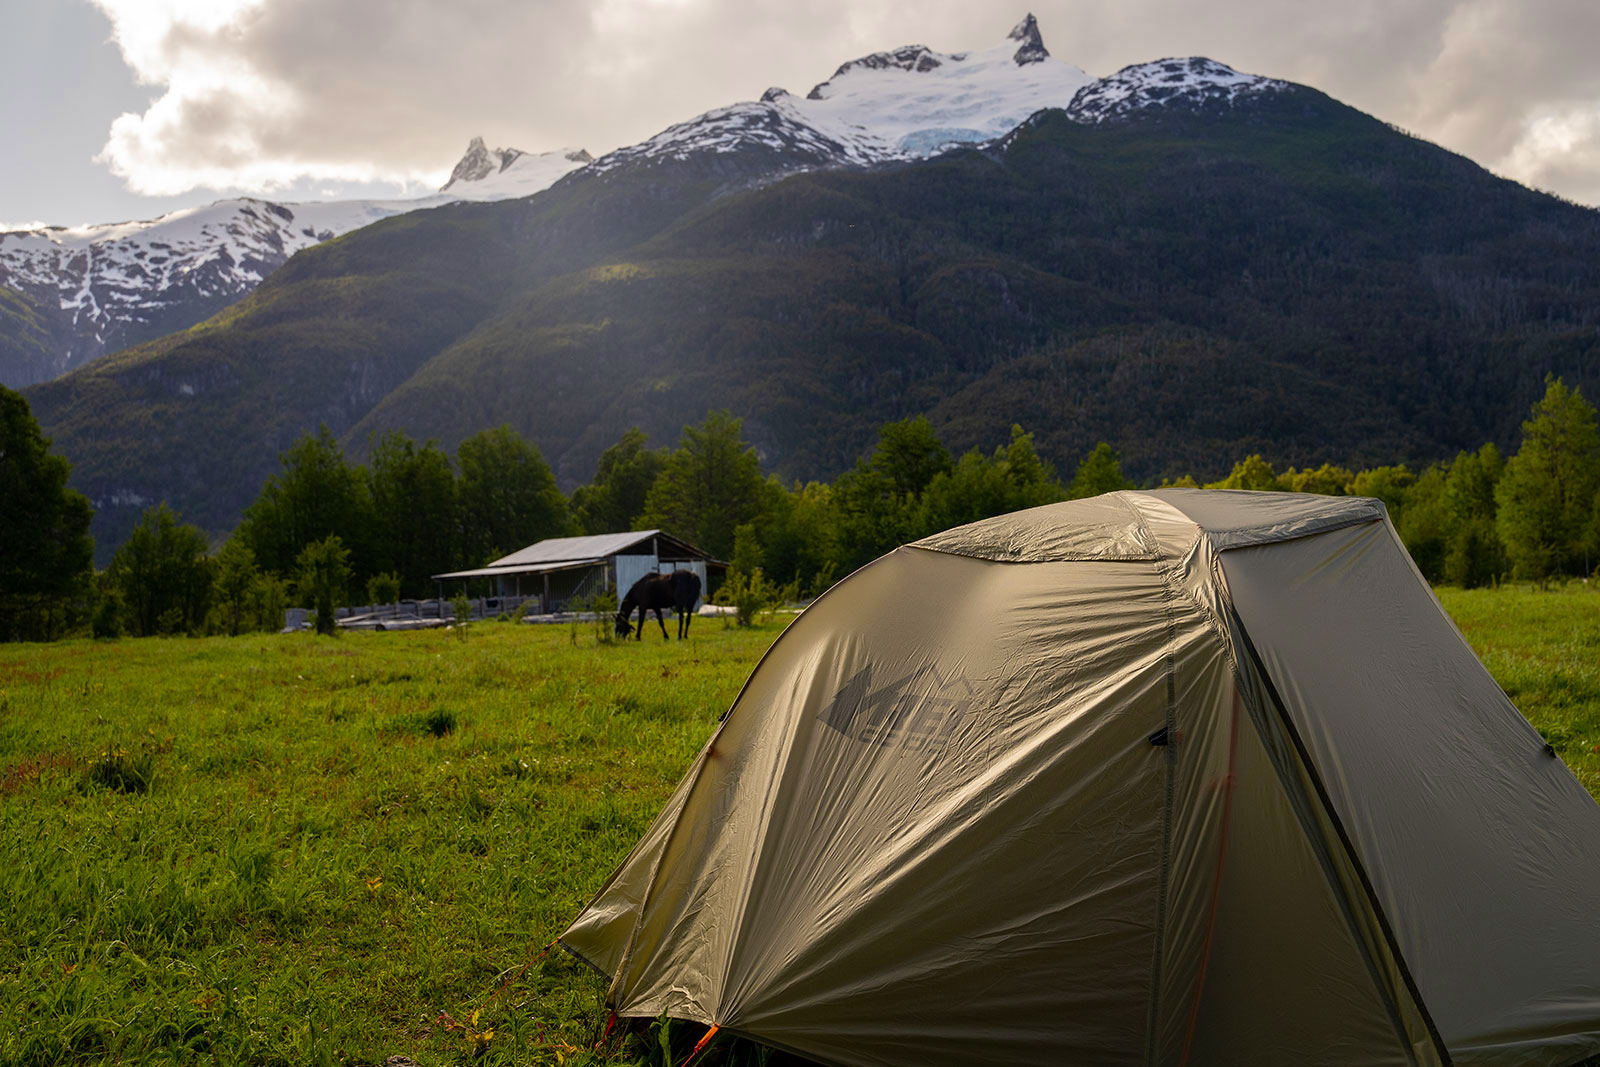 A beige tent is pitched on green grass under large snow capped mountains in Patagonia, Chile.